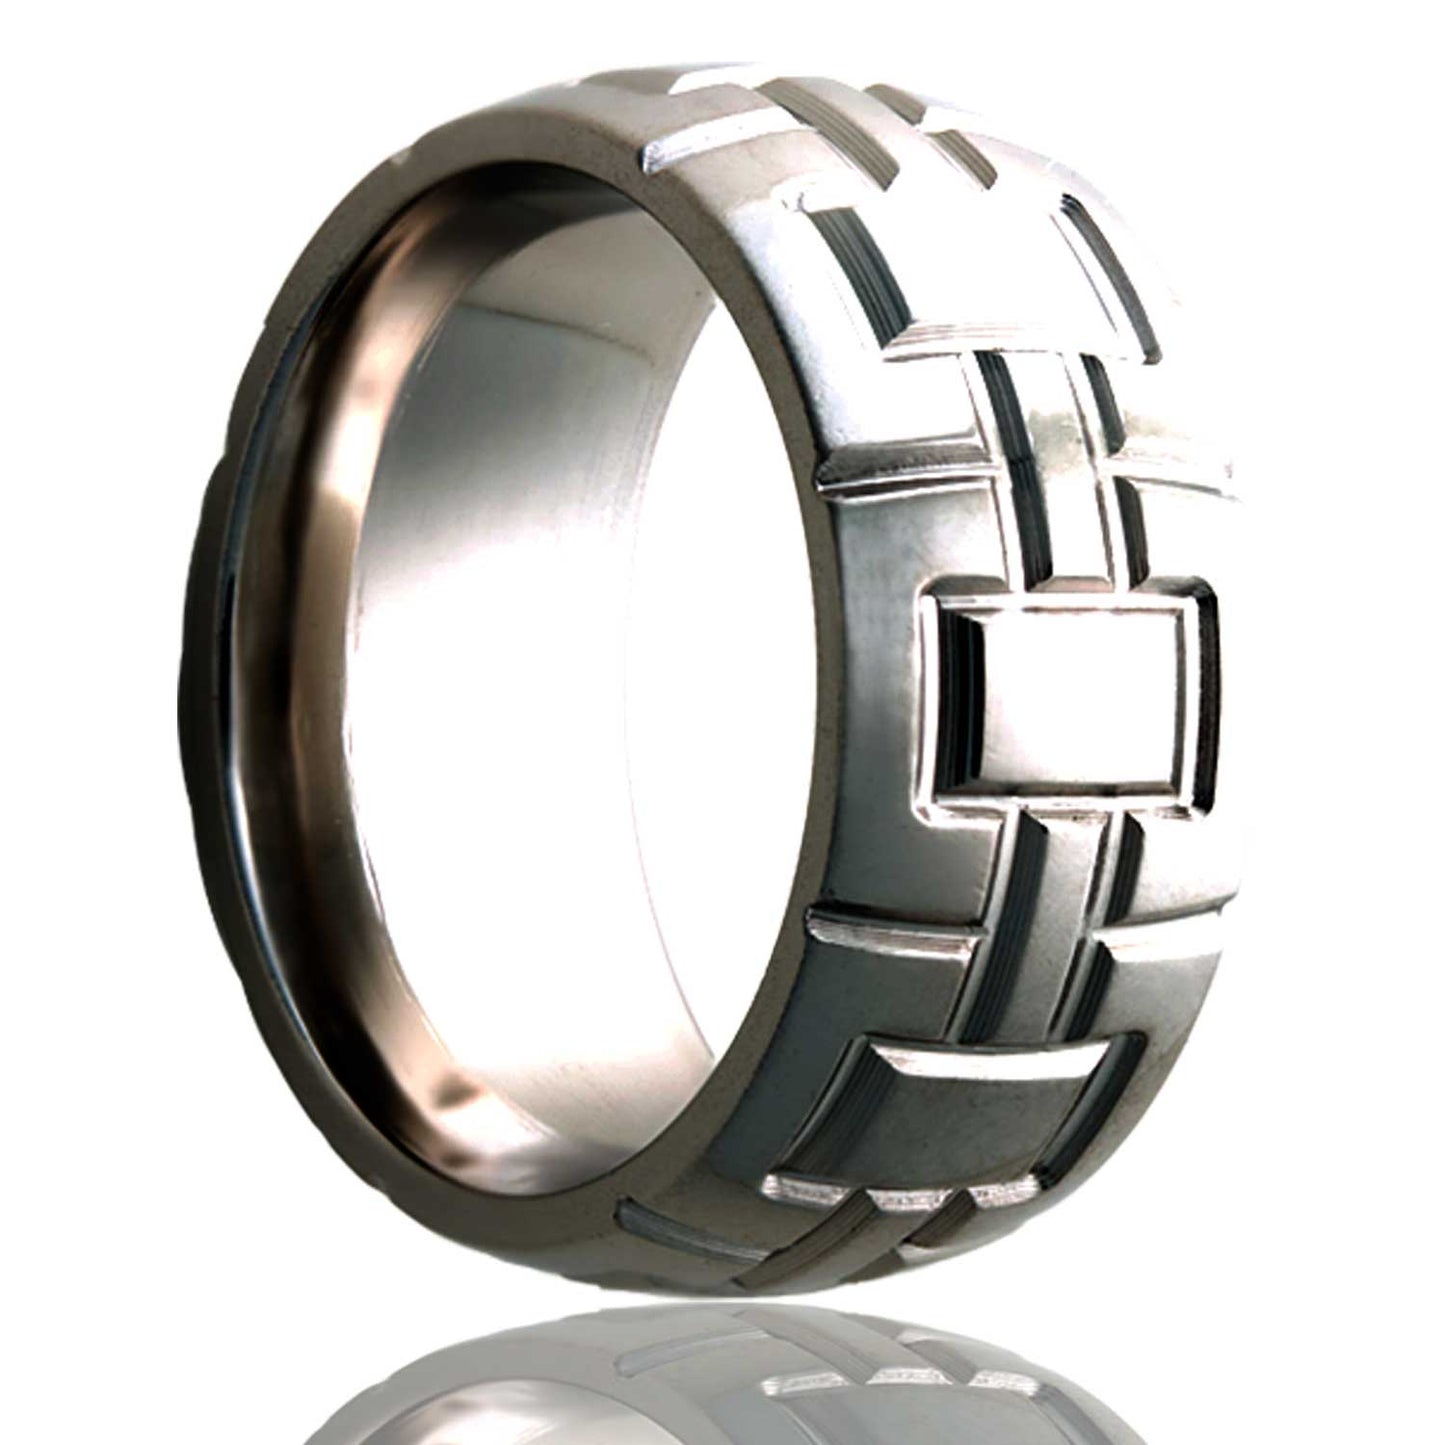 A geometric cube pattern domed titanium wedding band displayed on a neutral white background.